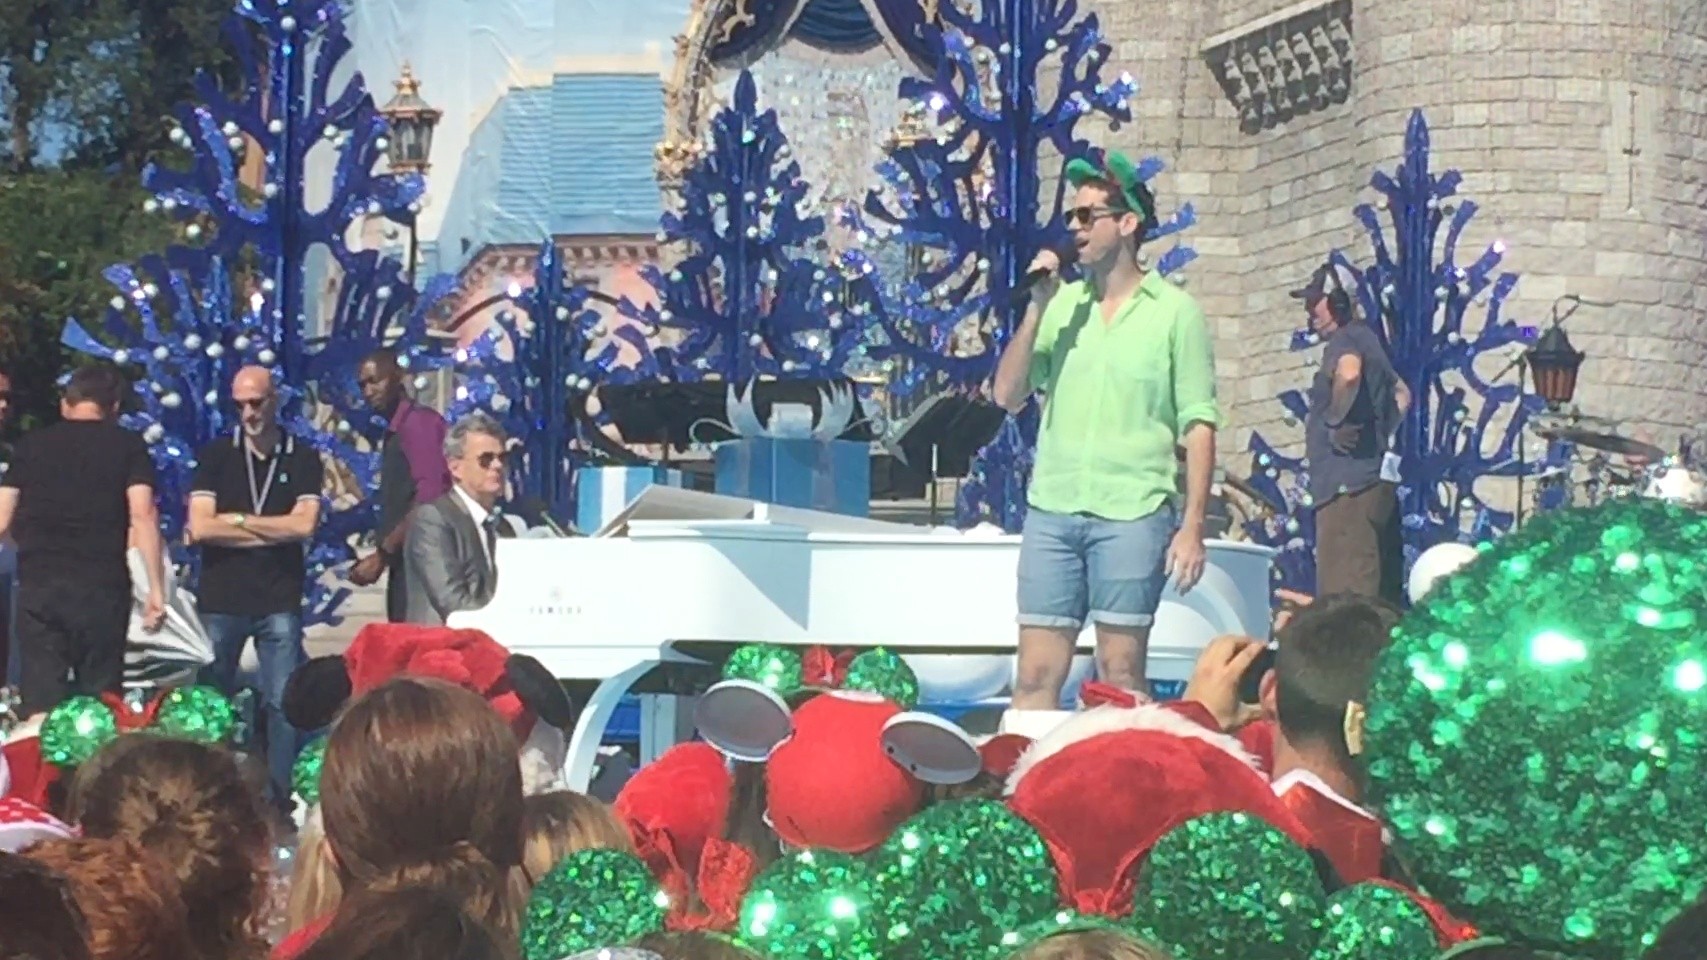 Audience member stuns crowd and David Foster during taping for annual Disney Christmas Celebration